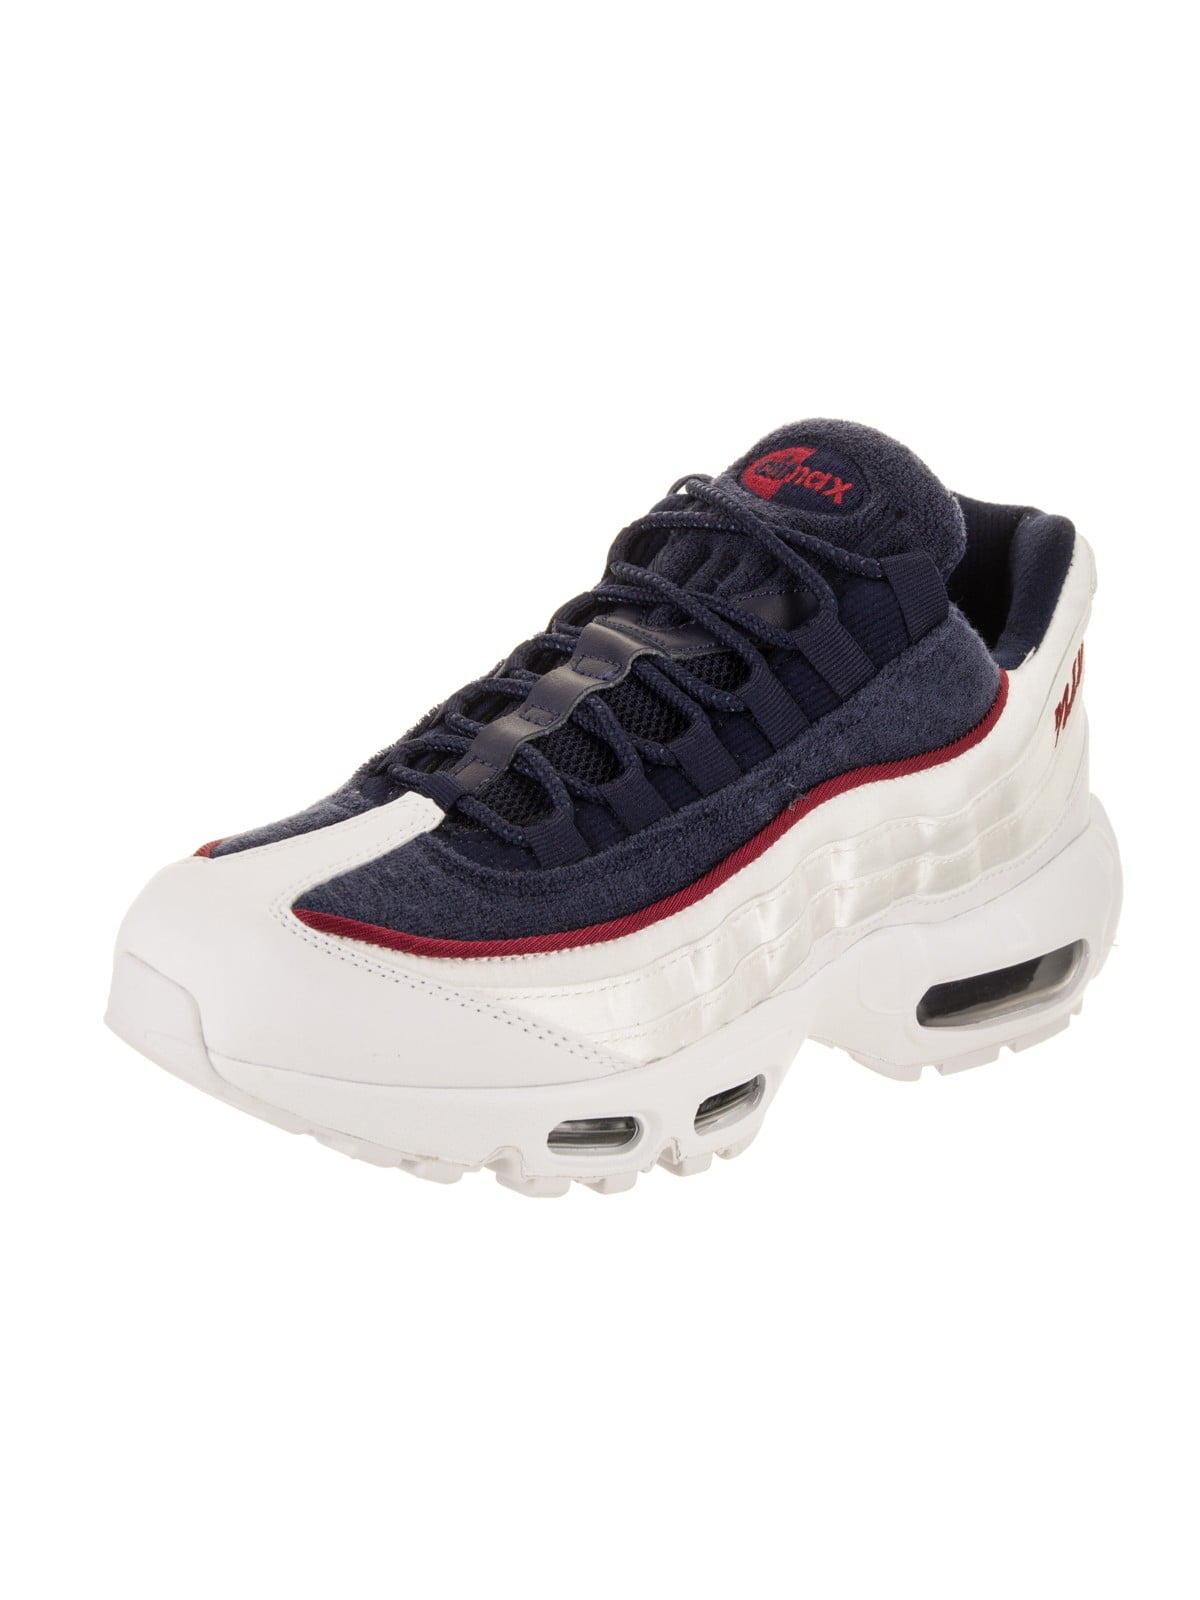 women's nike air max 95 lx casual shoes